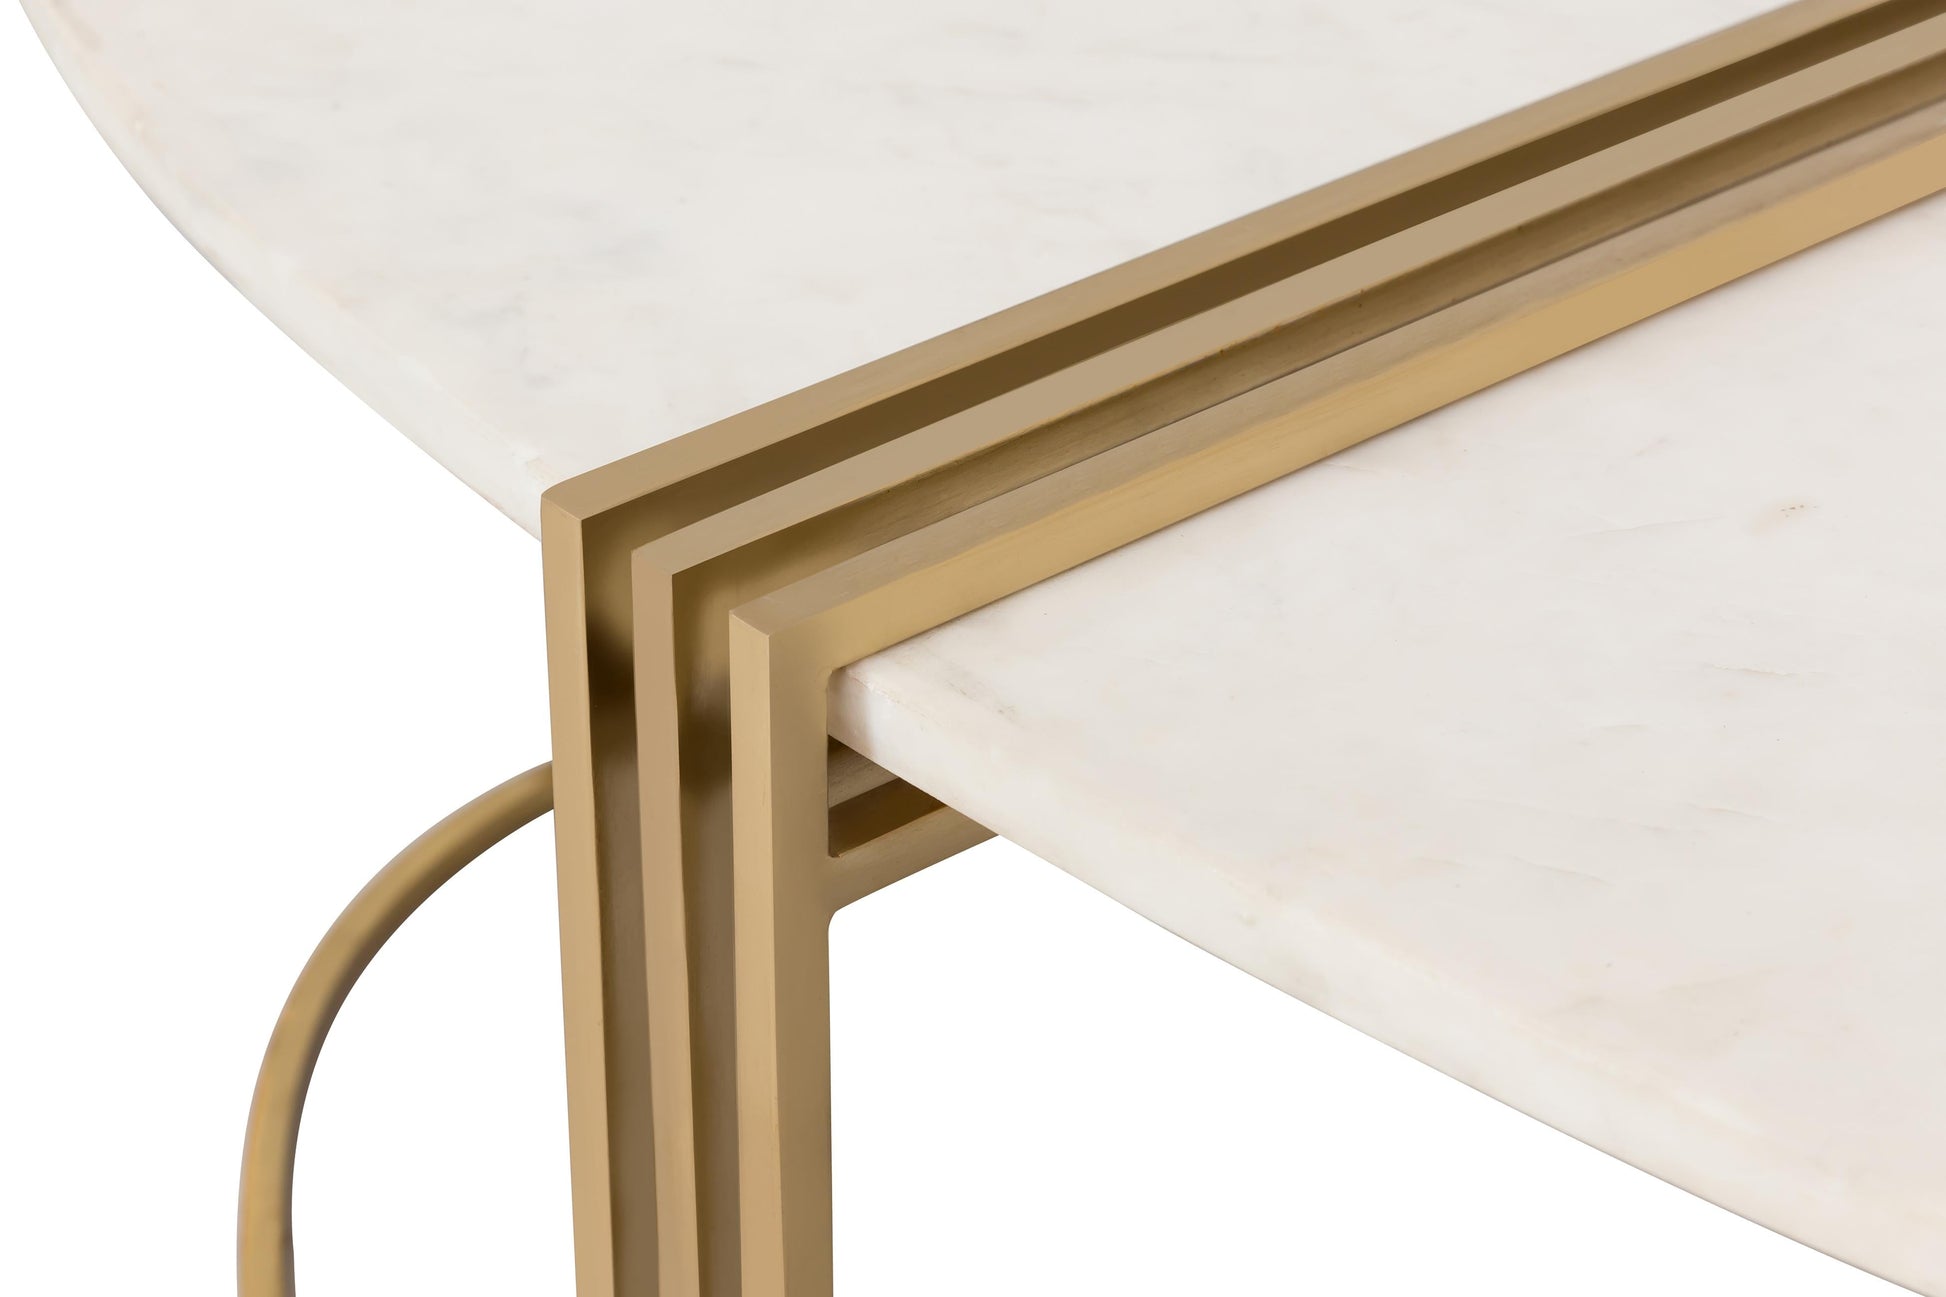 Caleb Oval White Marble Coffee Table by TOV